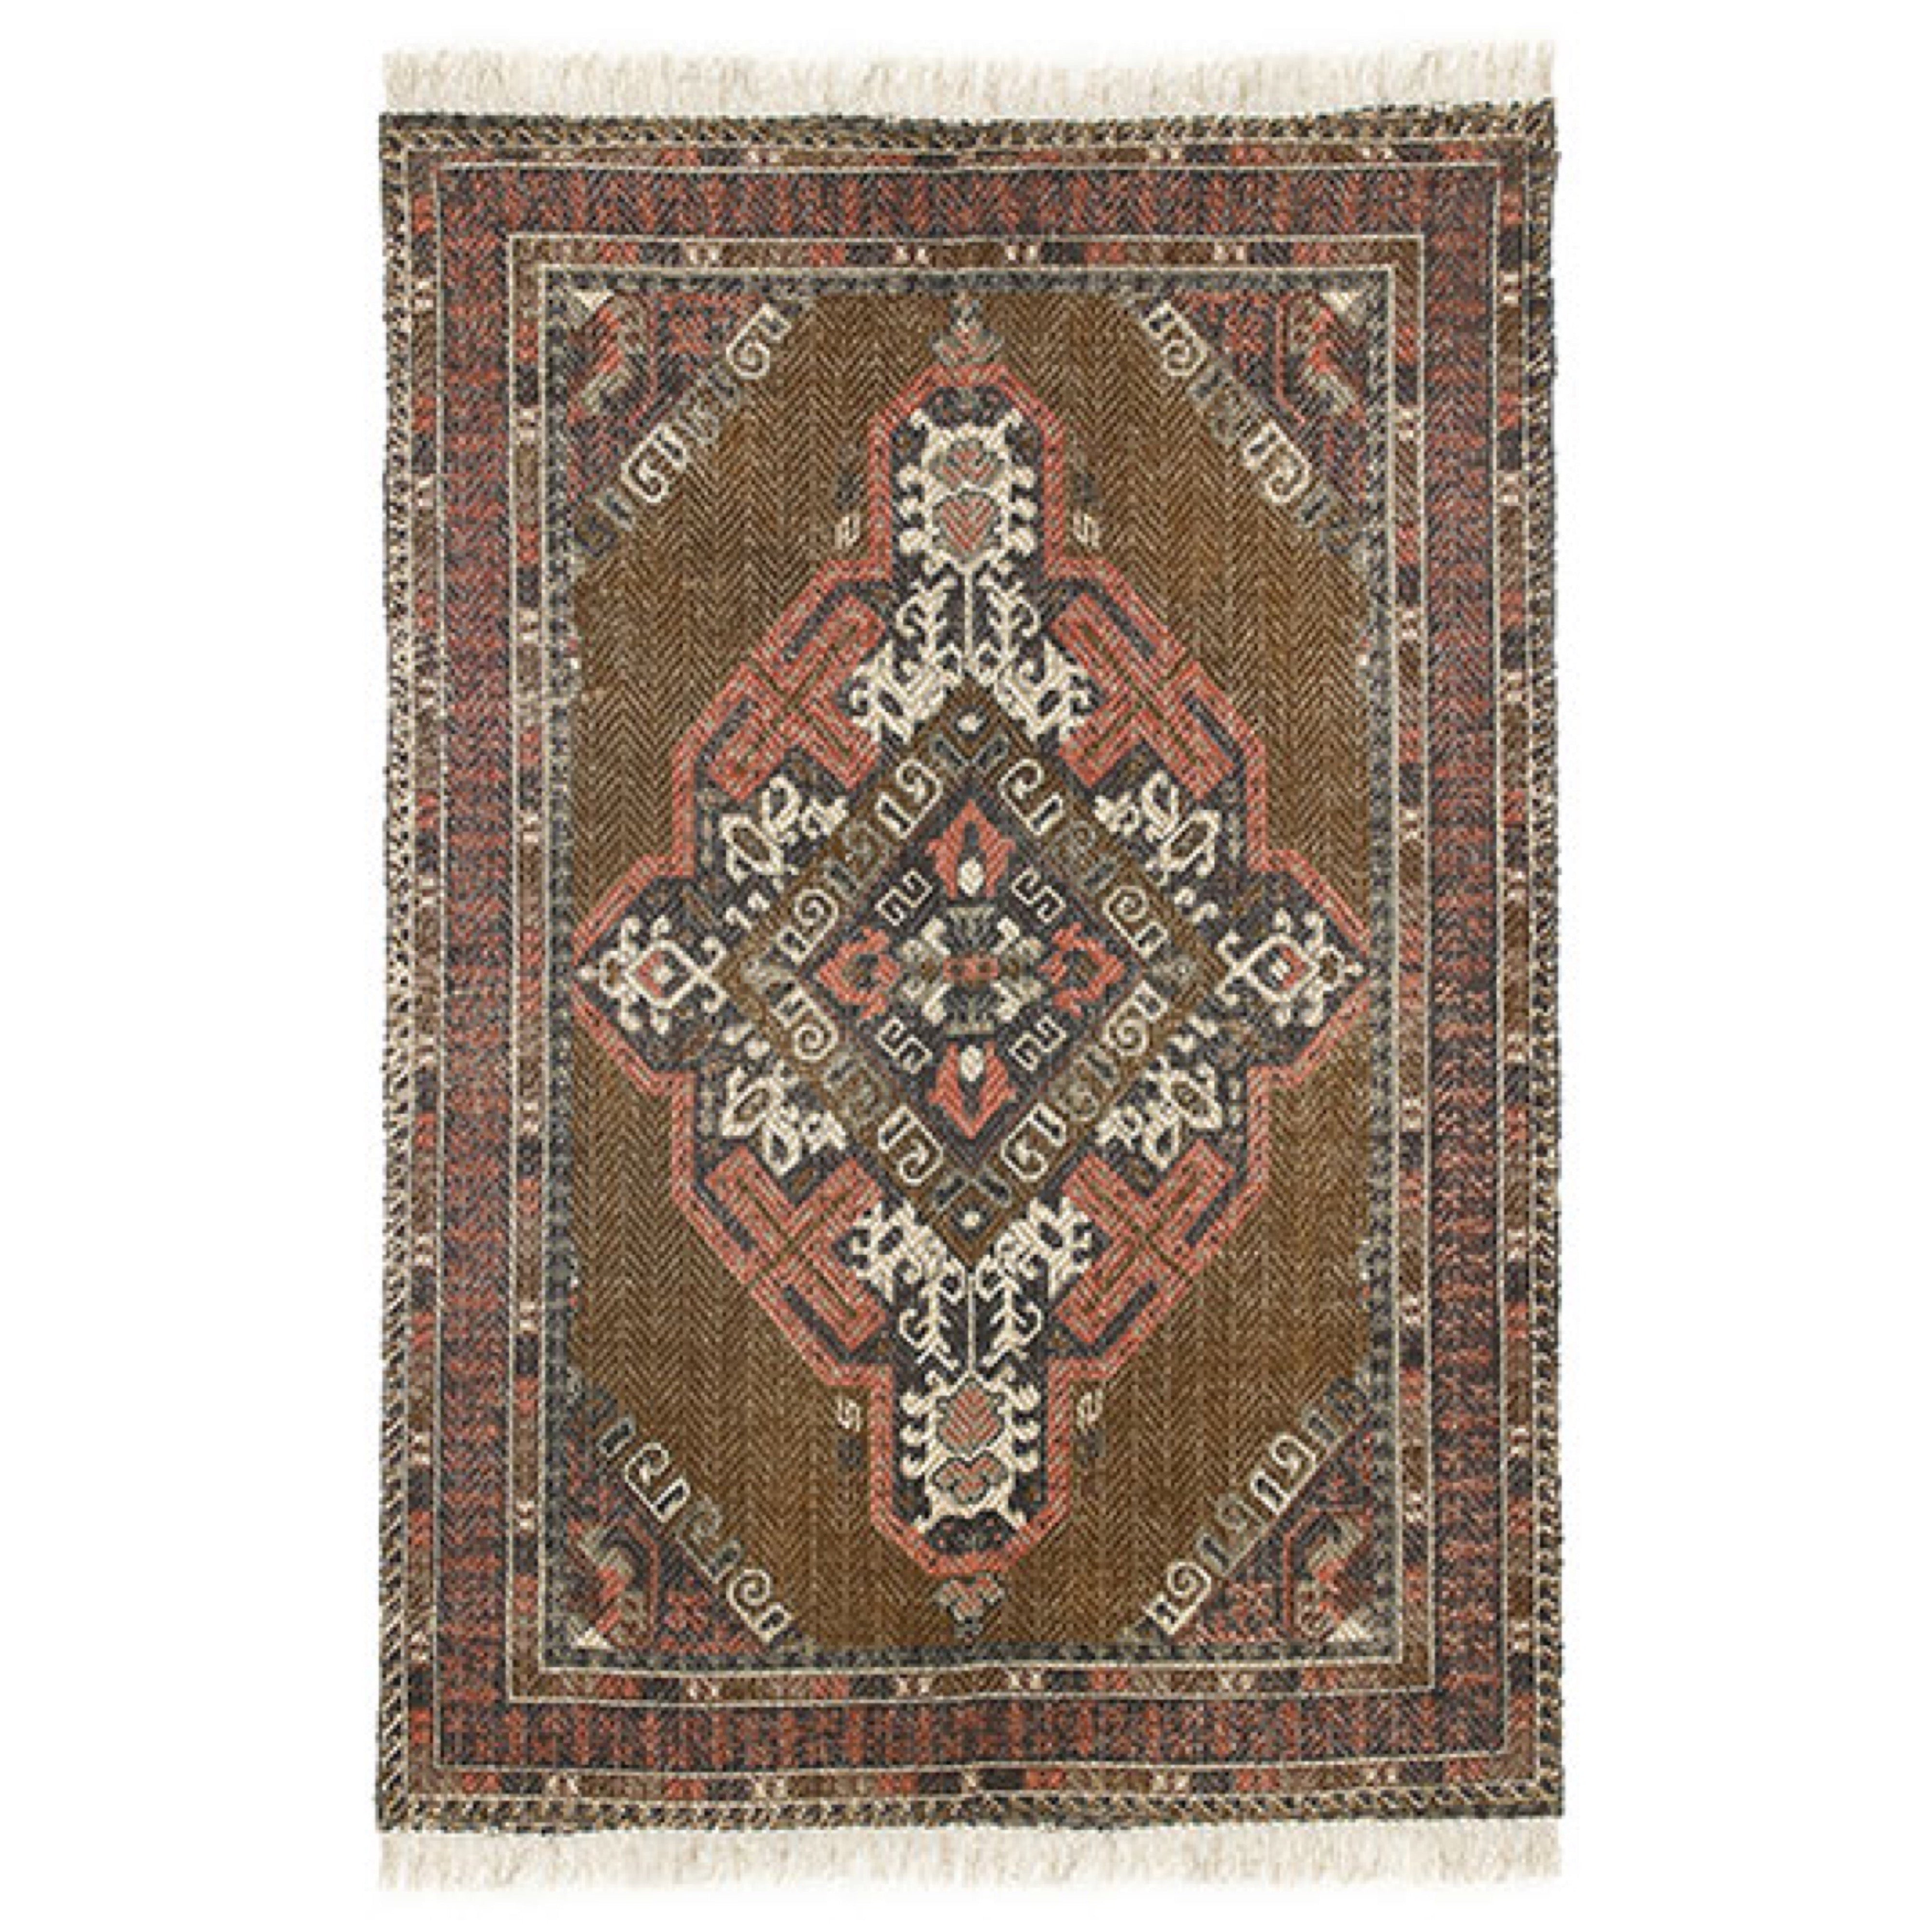 PRINTED STONE WASHED COTTON RUG